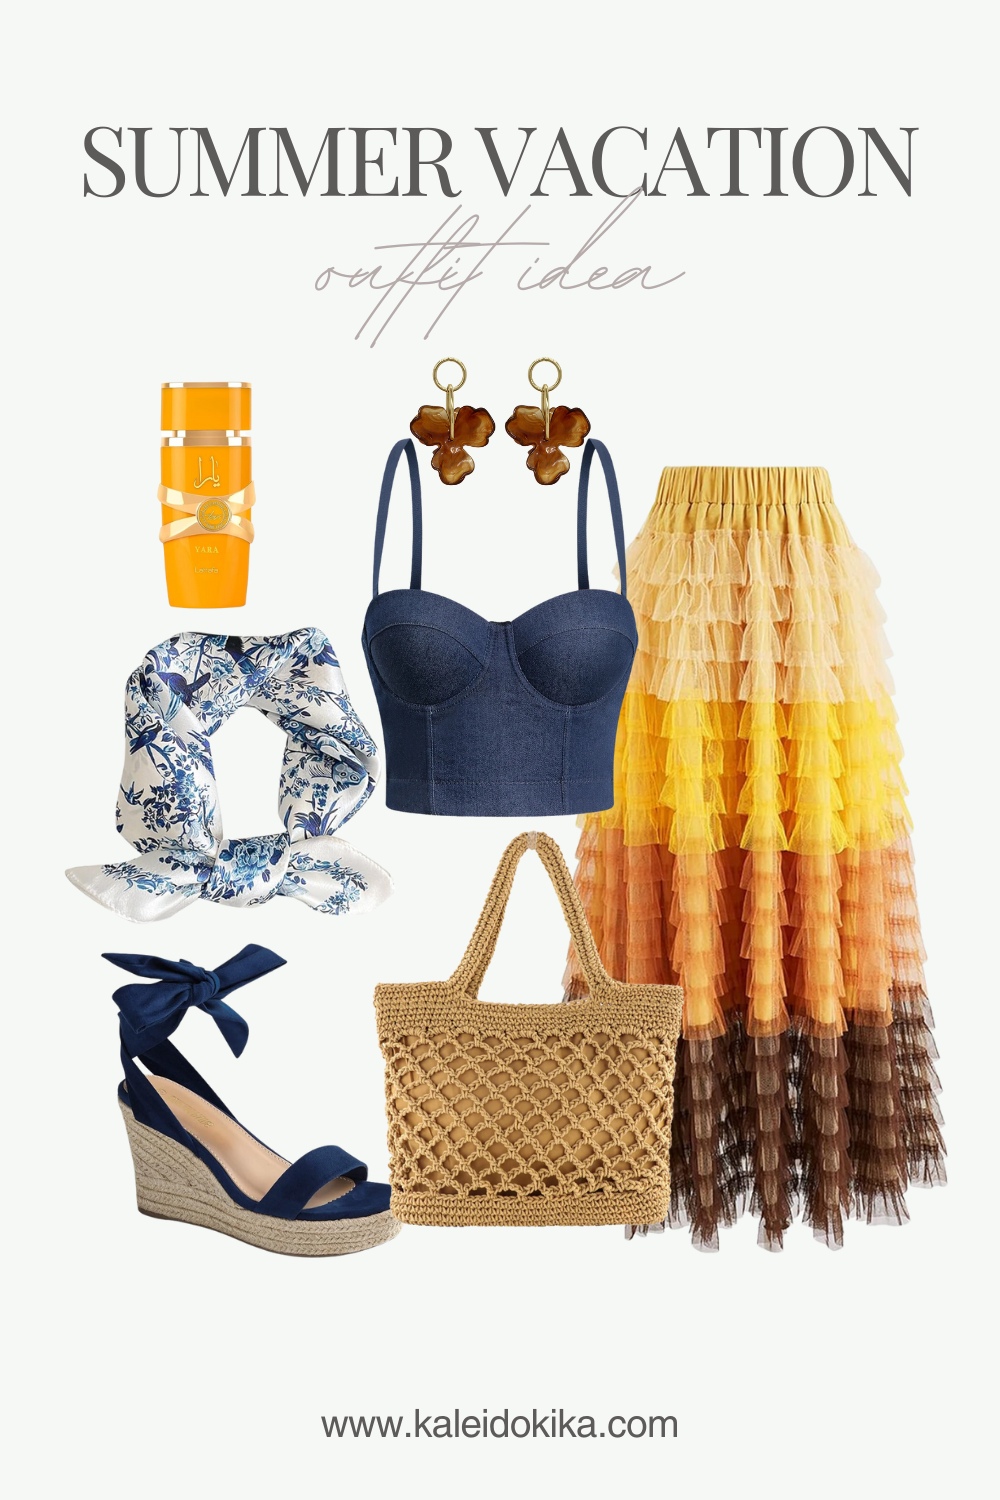 Image showing a cute summer vacation outfit idea